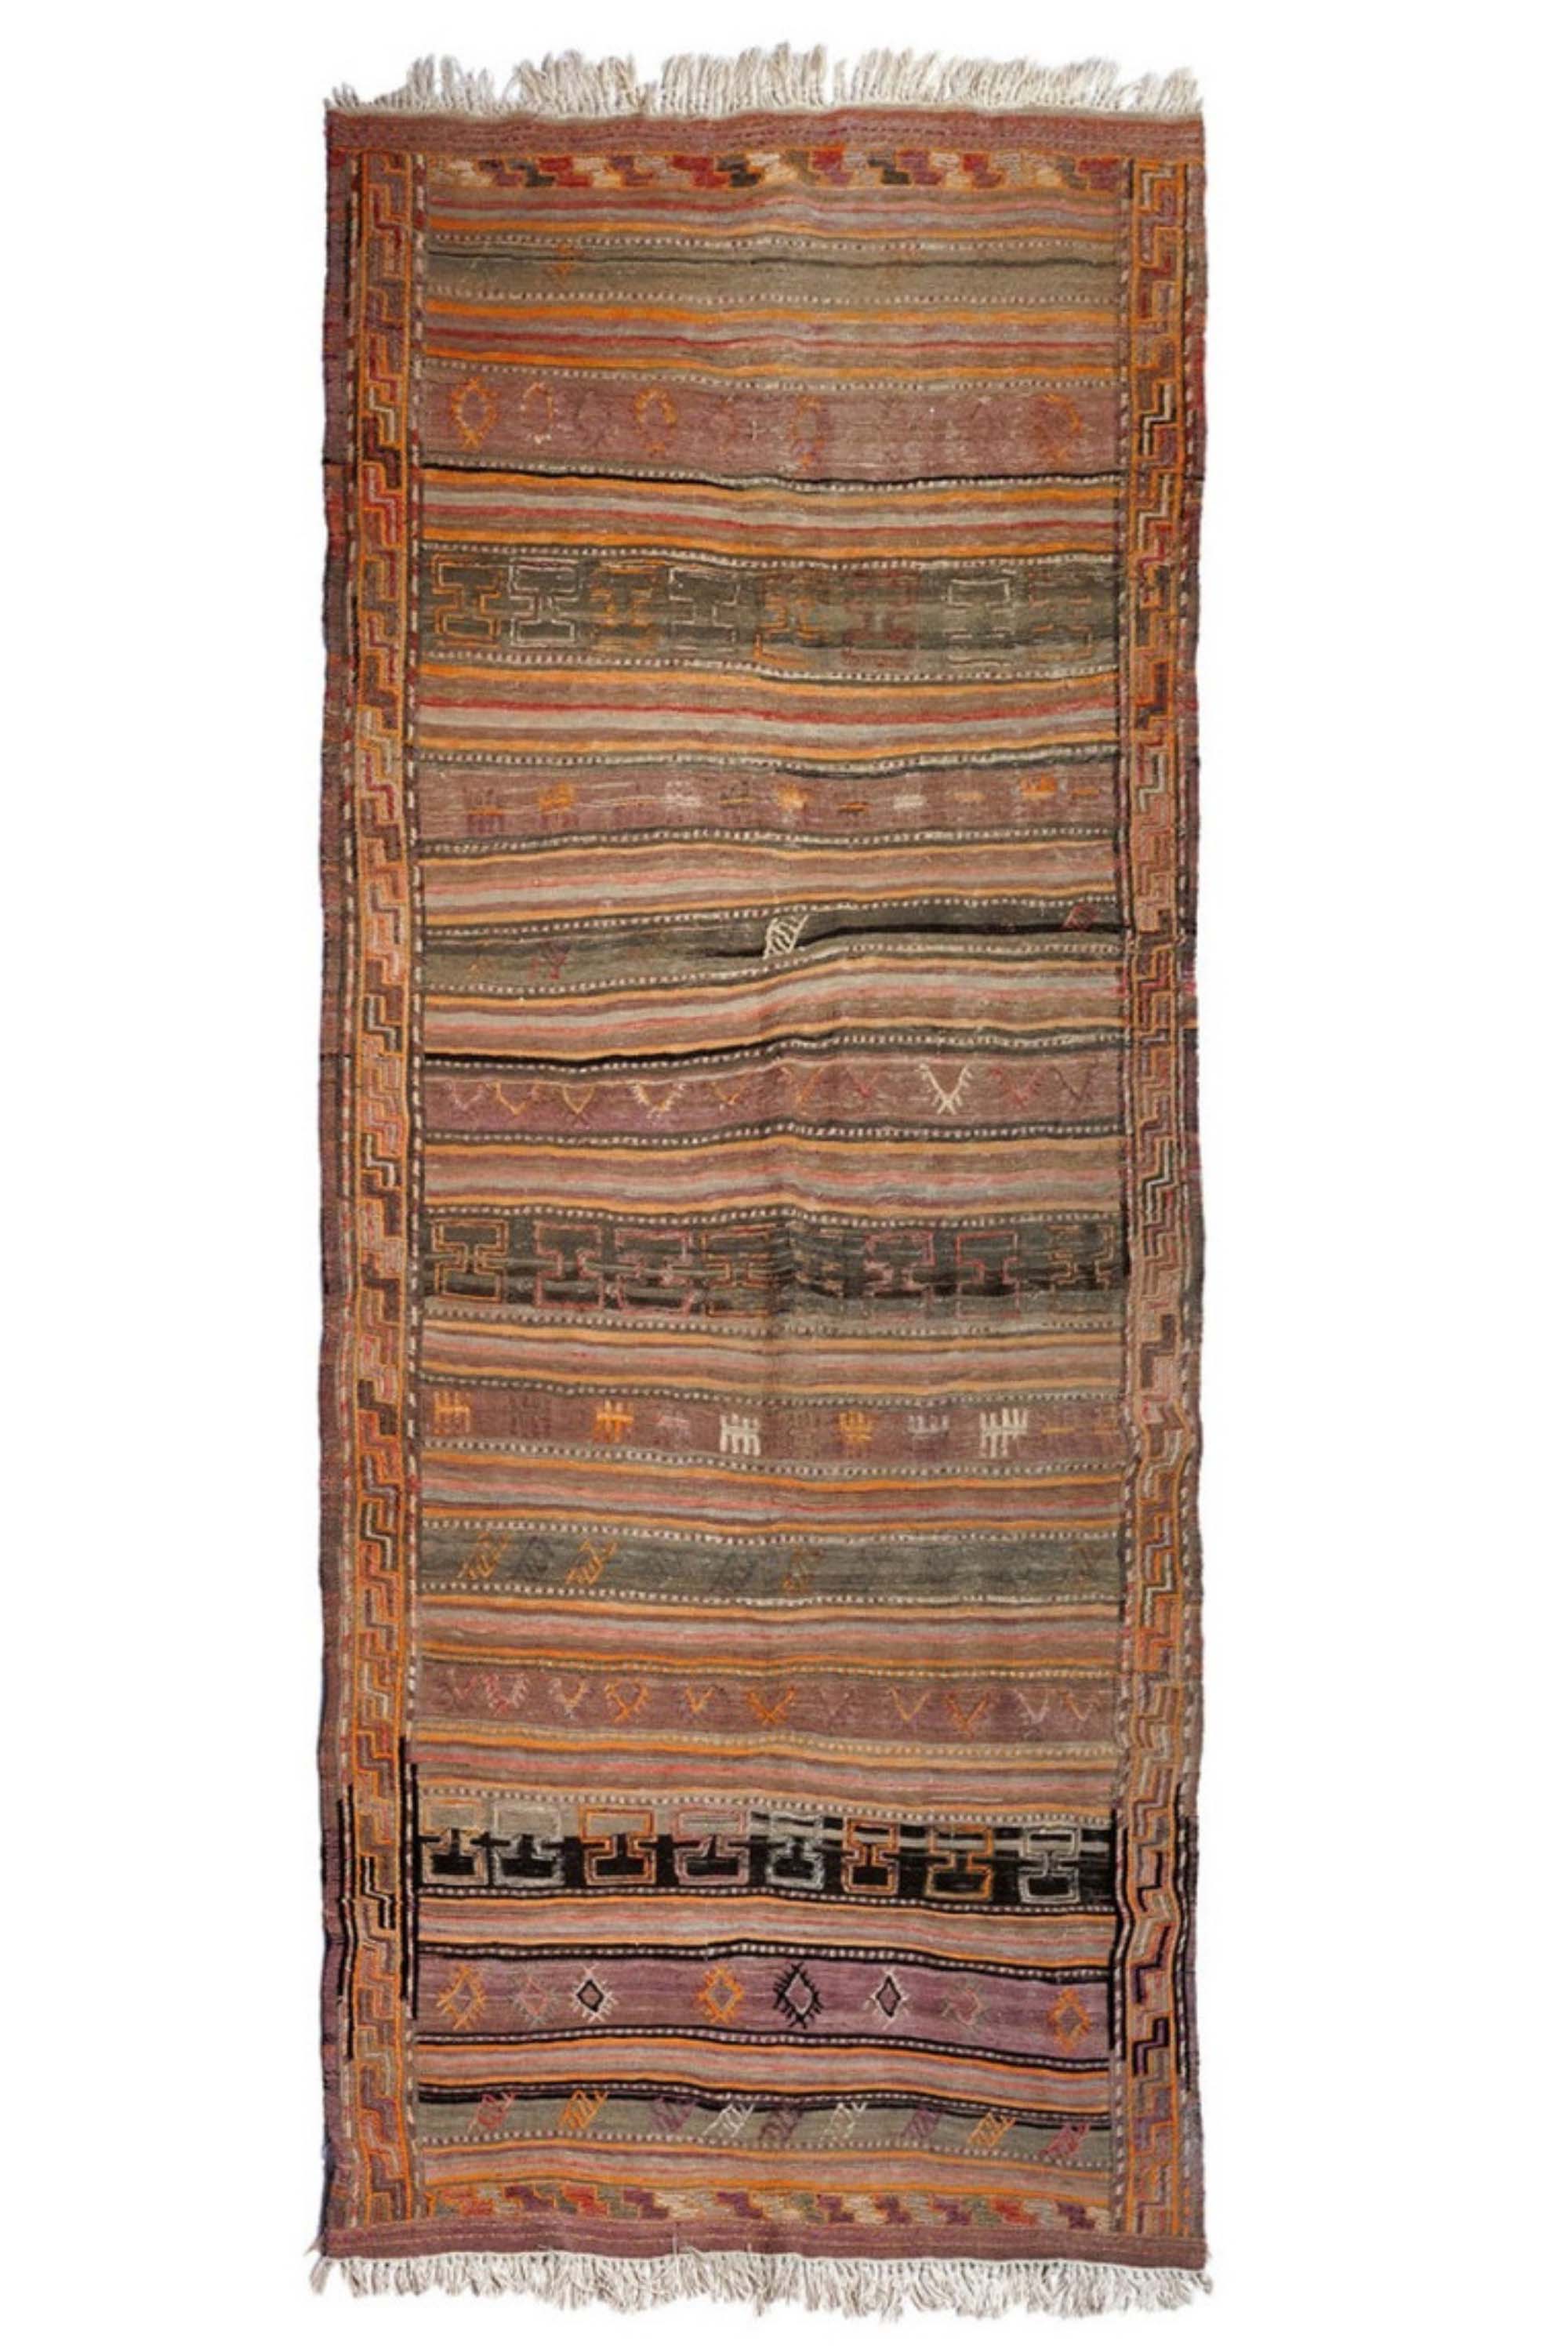 authentic persian runner with tribal geometric design in orange, purple, black, and green